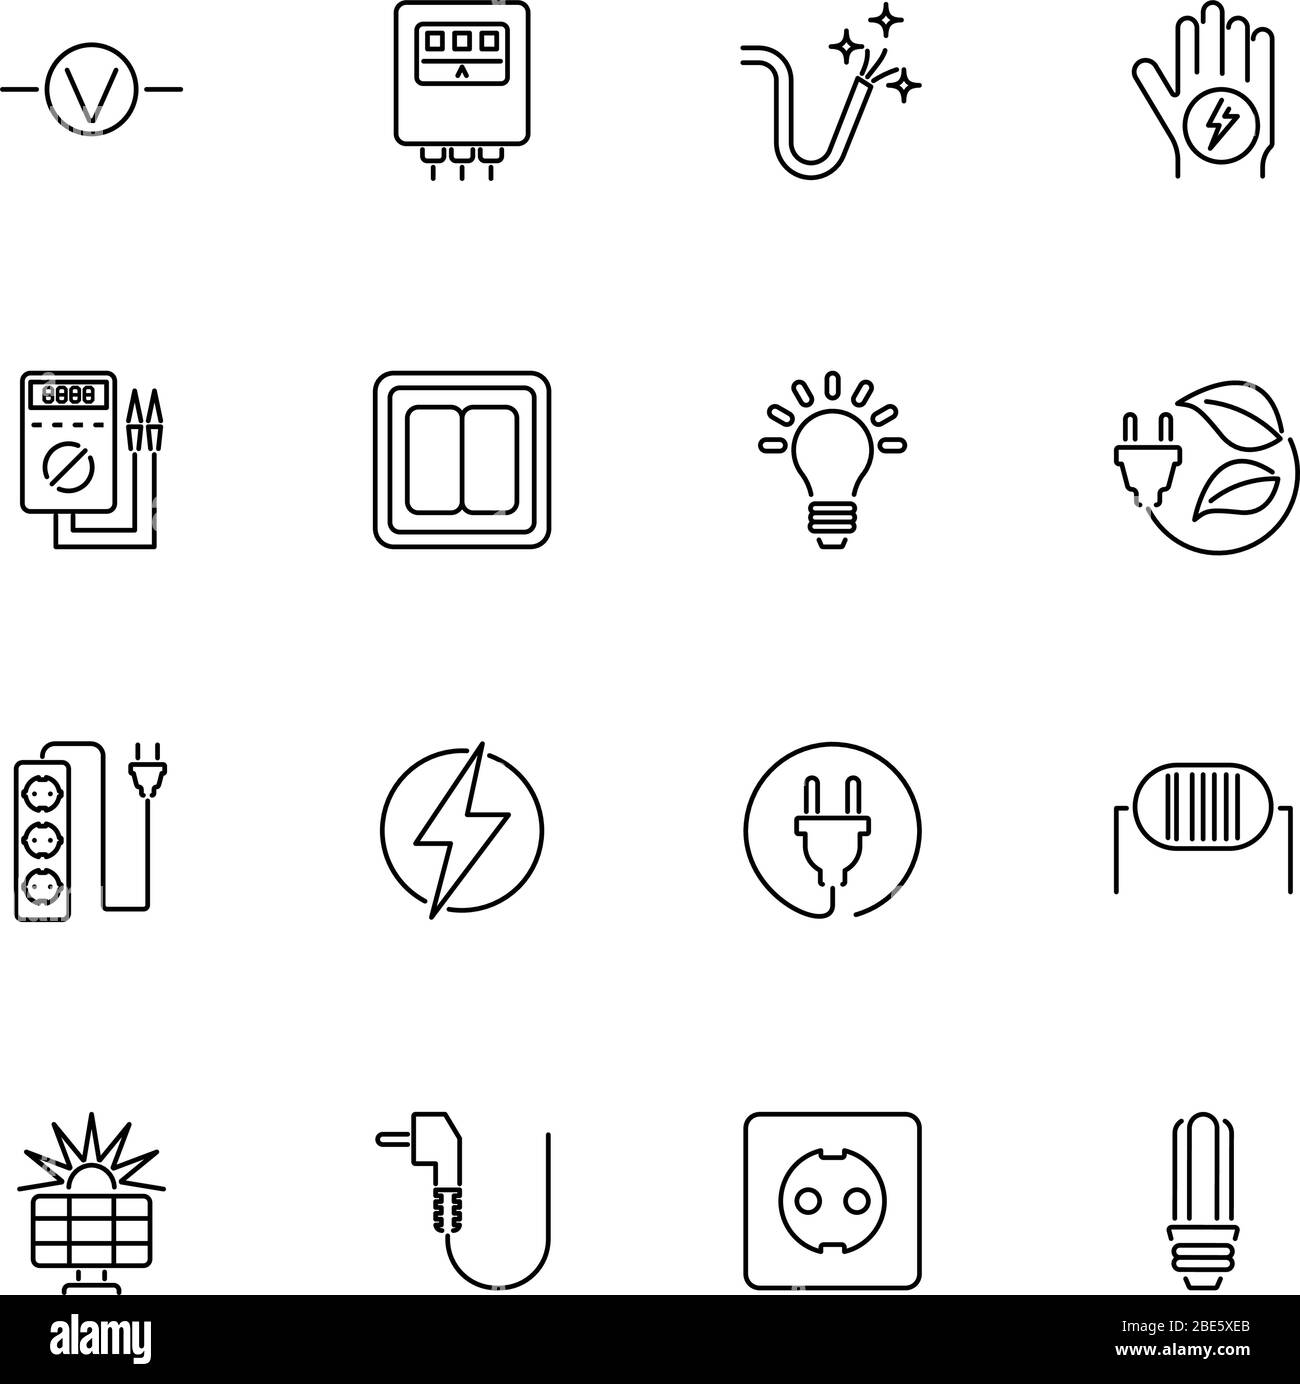 Electricity, Electrification outline icons set - Black symbol on white background. Electricity, Voltage Simple Illustration Symbol - lined simplicity Stock Vector